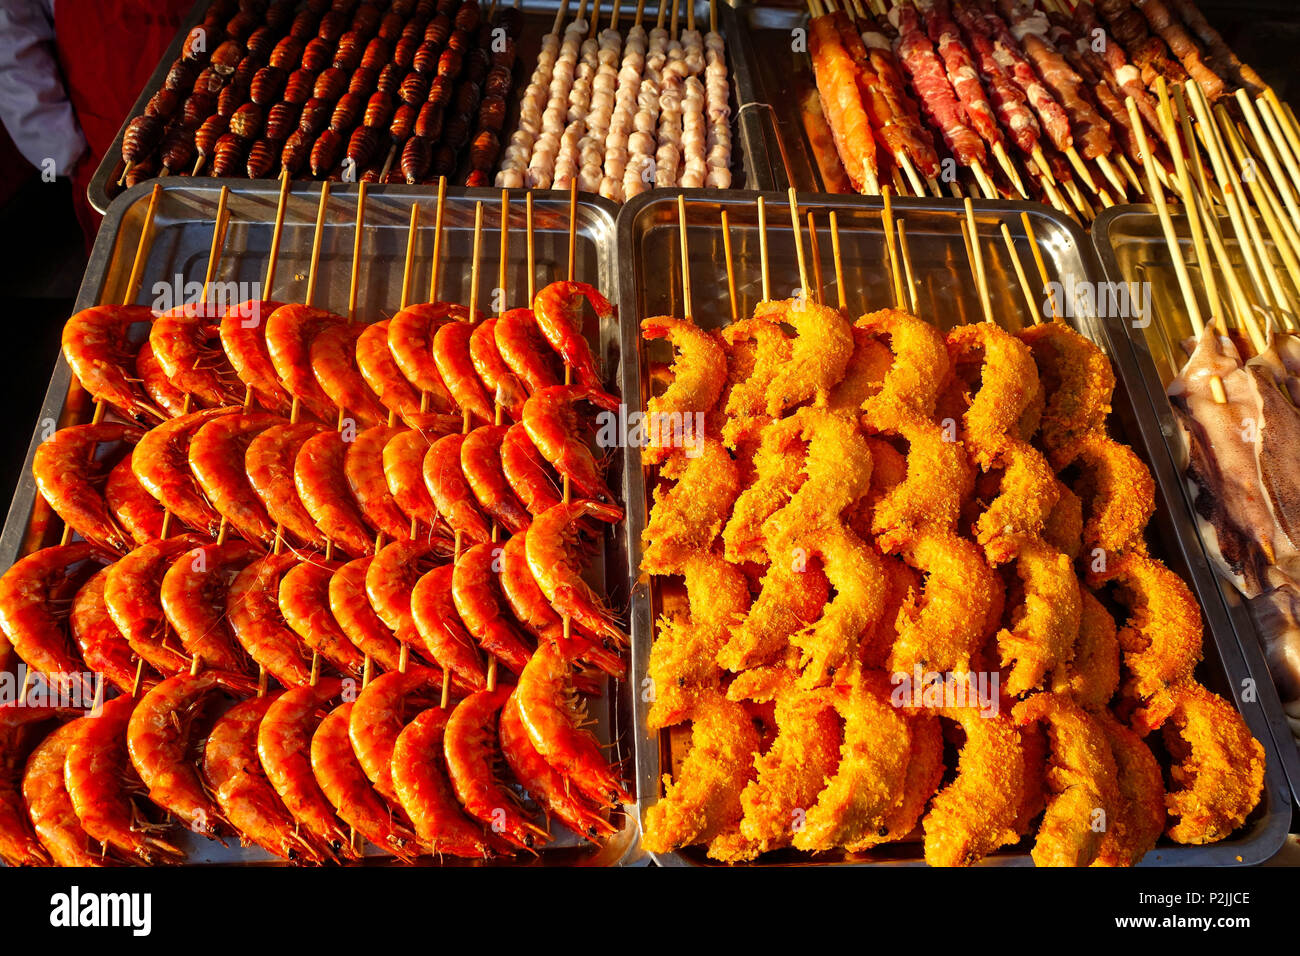 Exotic snacks and desserts can be found in this famous market Donghuamen Night food market near Wangfujing street, Beijing, China Stock Photo